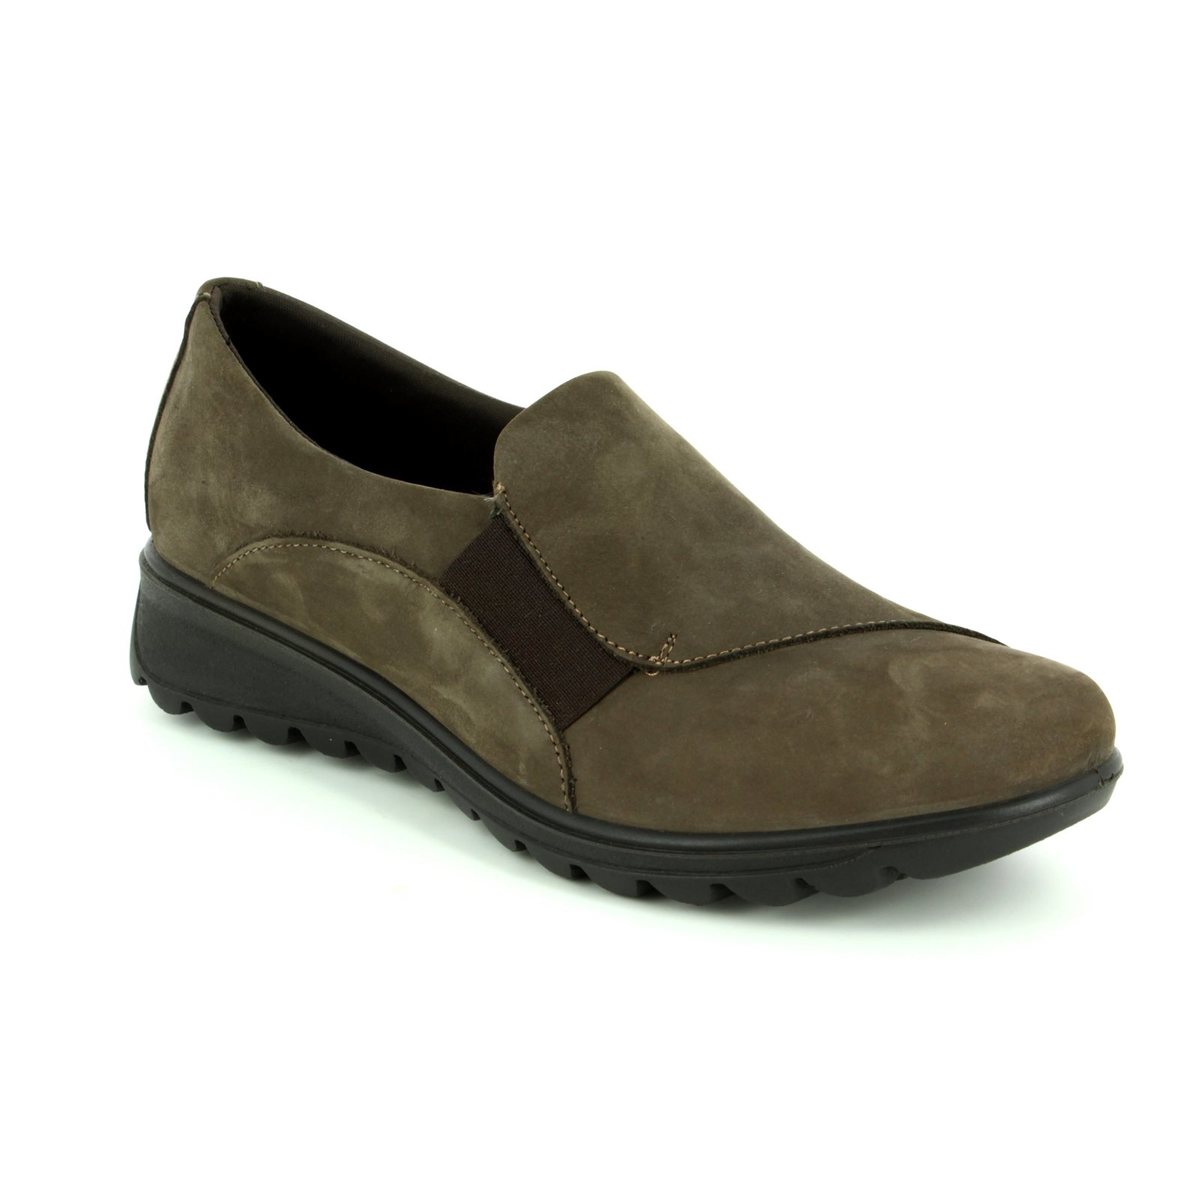 IMAC Karena Taupe nubuck Womens Comfort Slip On Shoes 7860-30053017 in a Plain Leather in Size 39